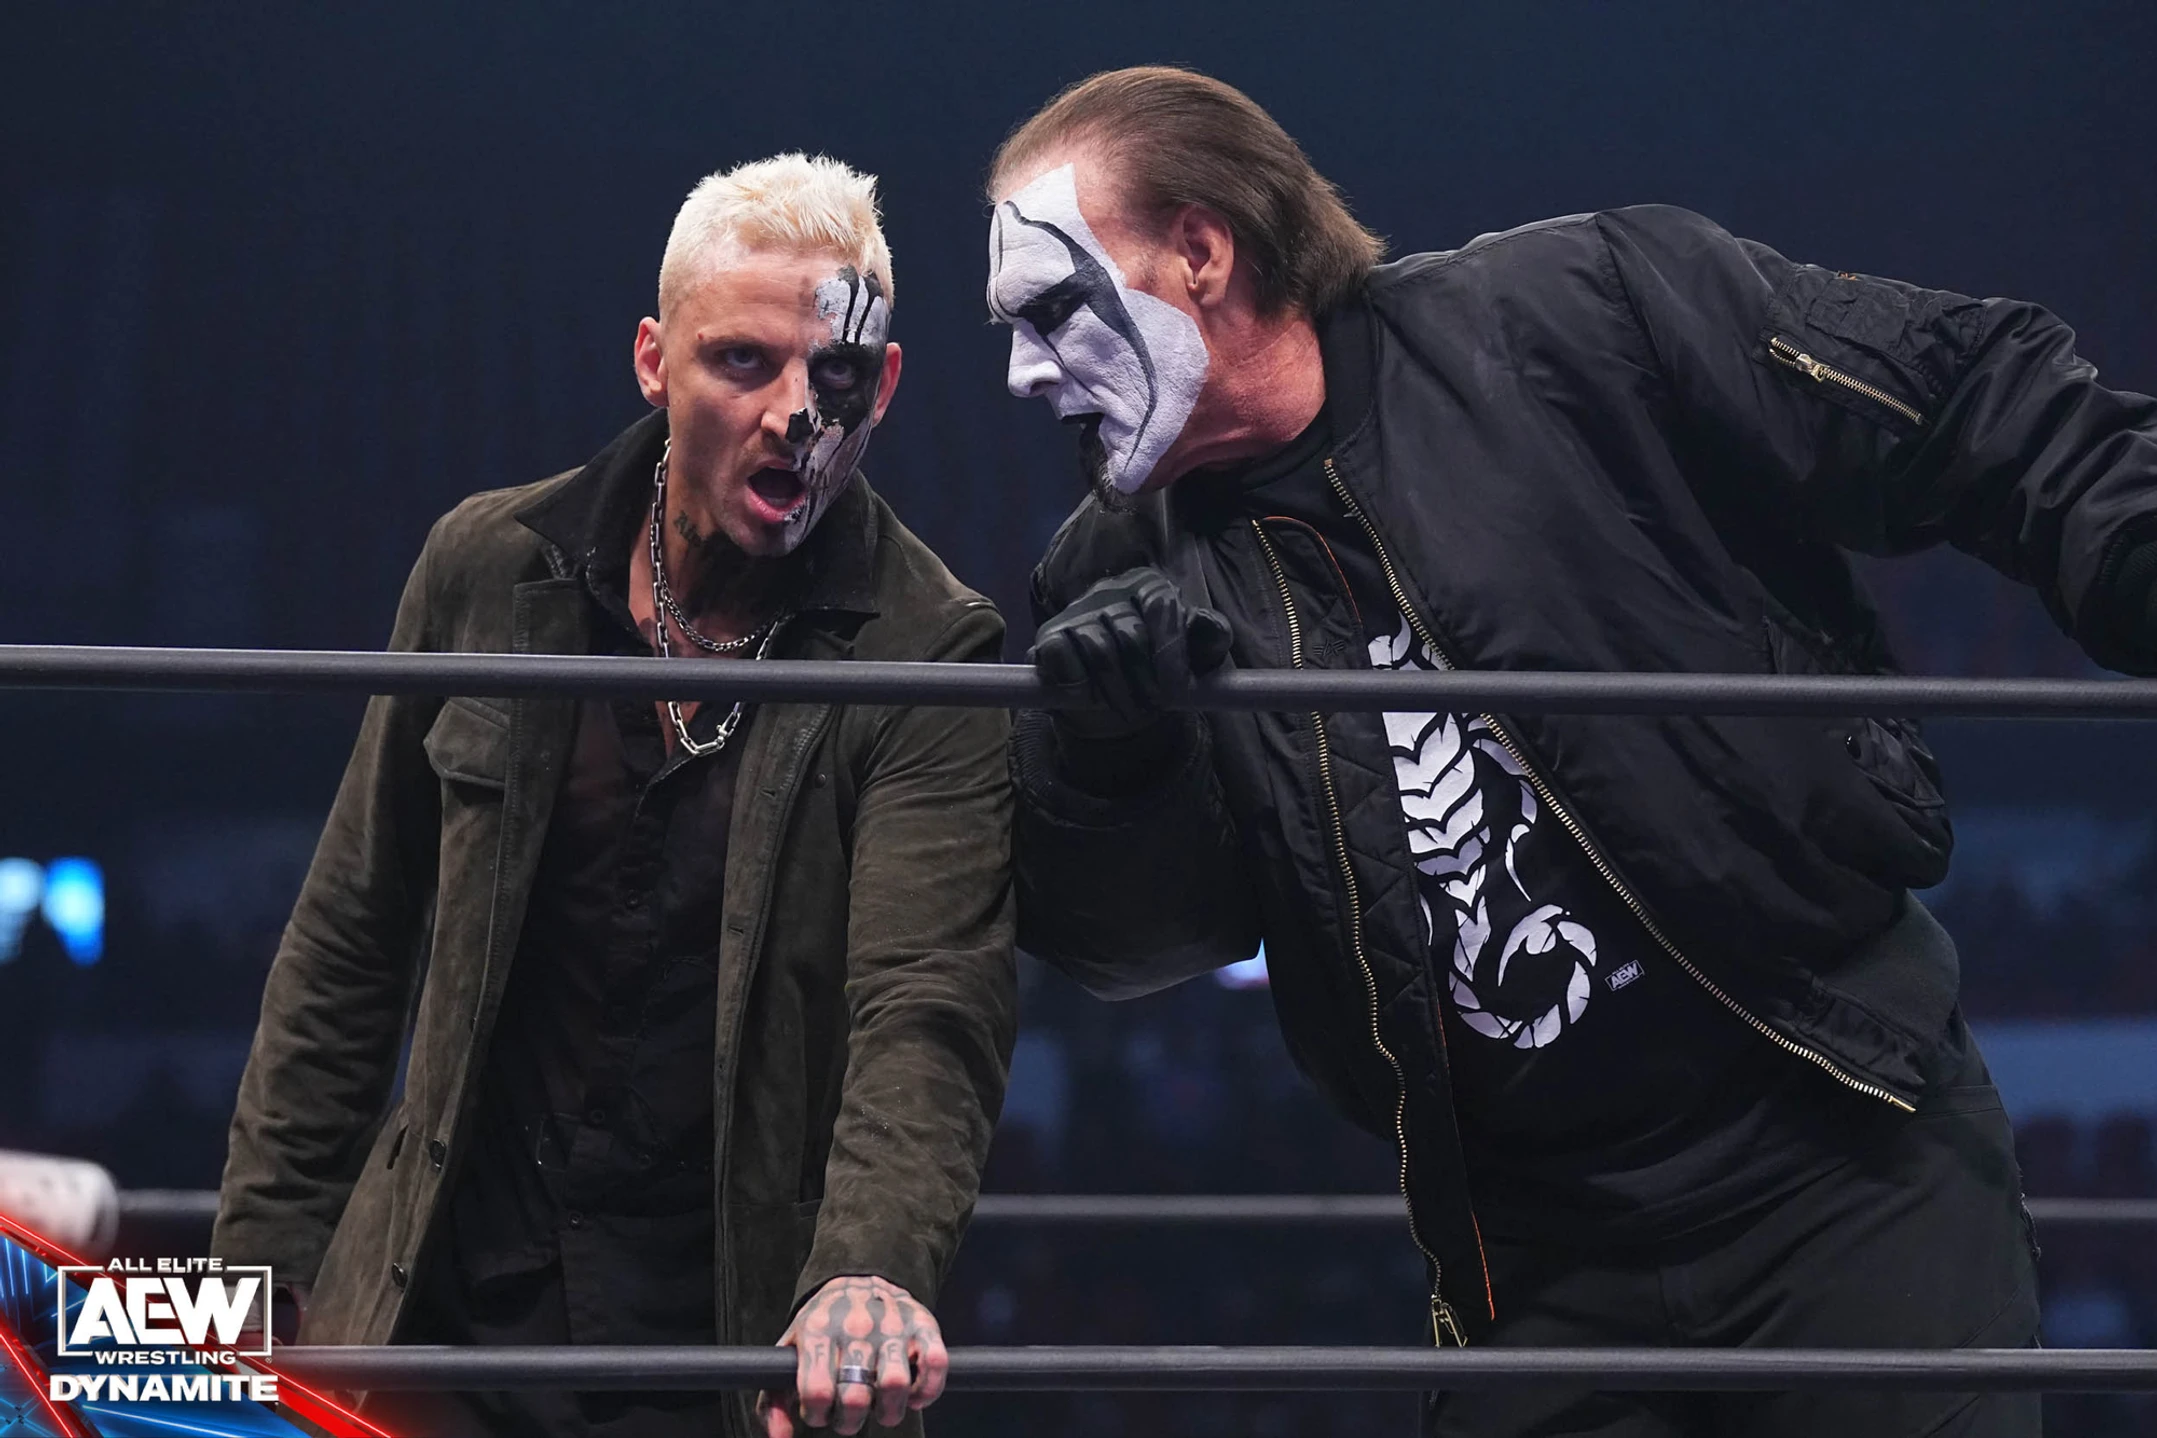 Darby Allin’s Determination to Ensure Sting’s Career Ends Triumphantly